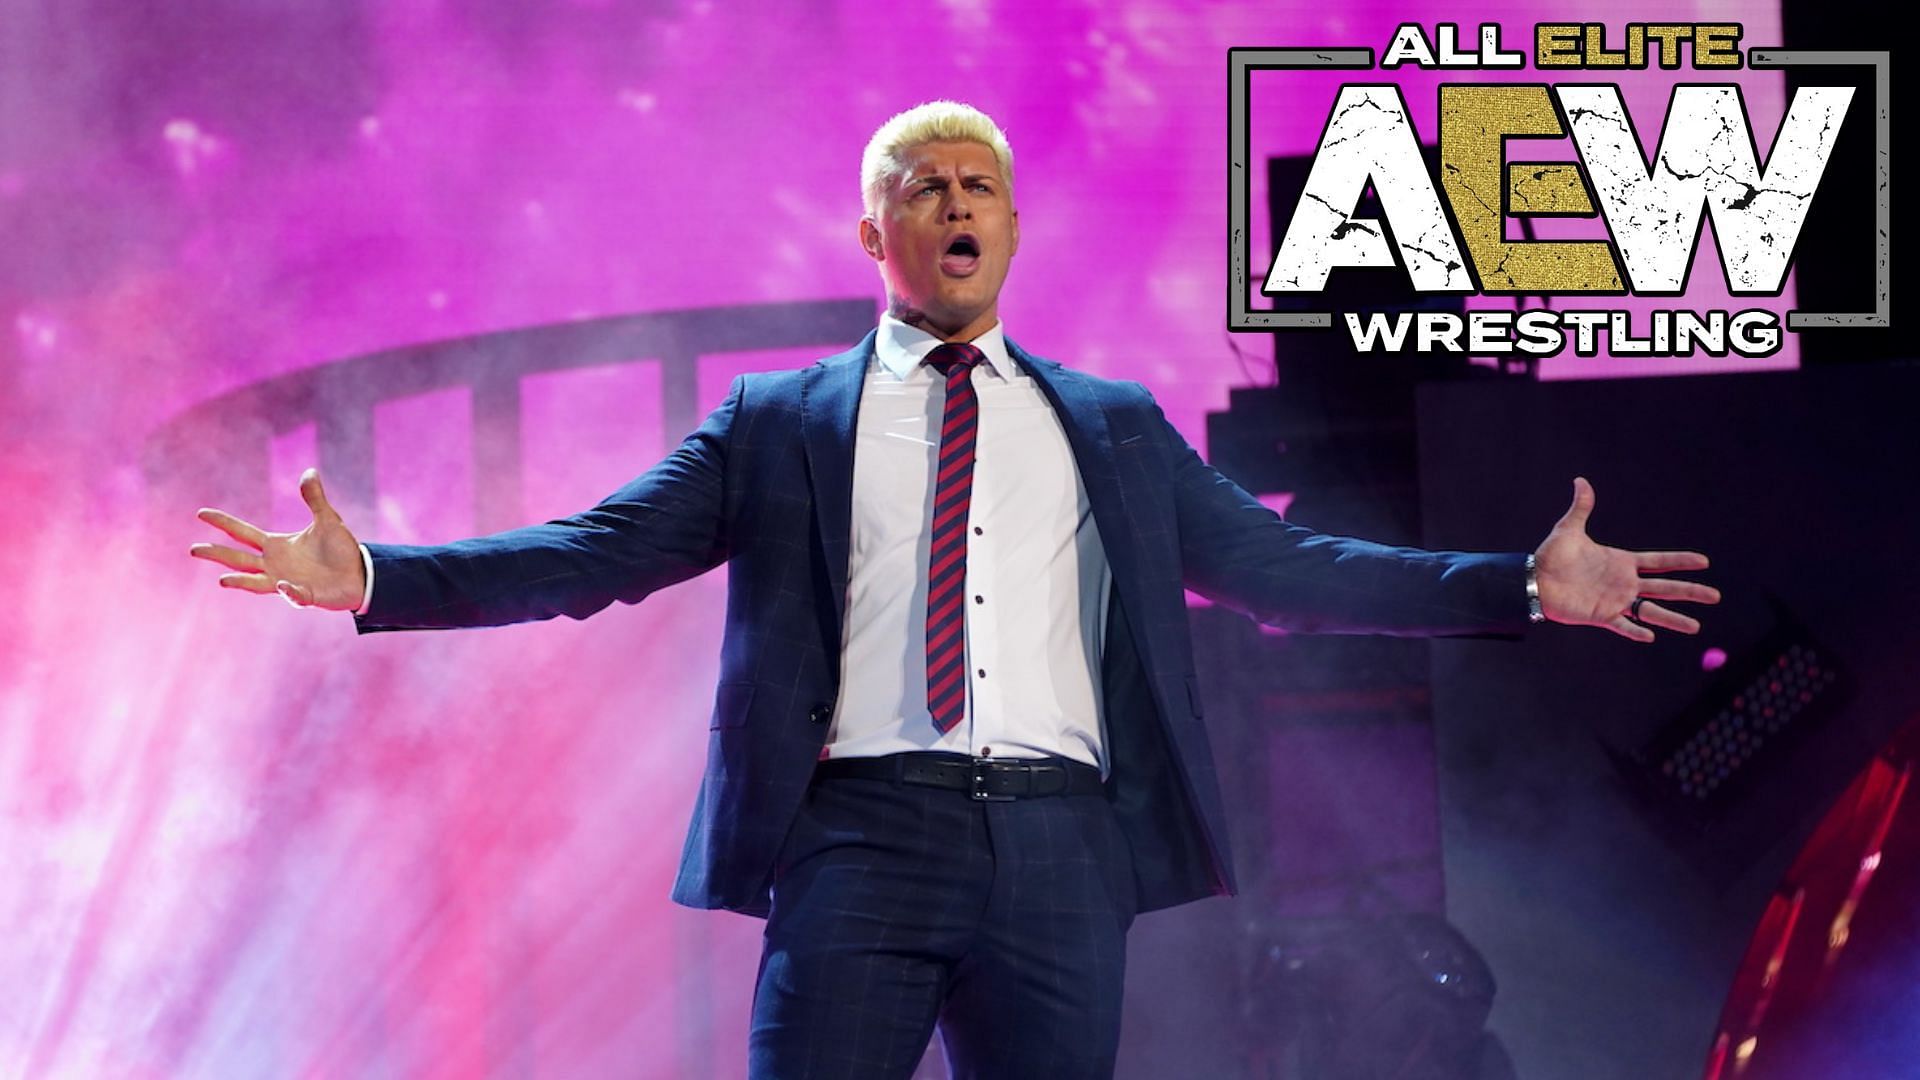 How many stars did Cody Rhodes bring into AEW?